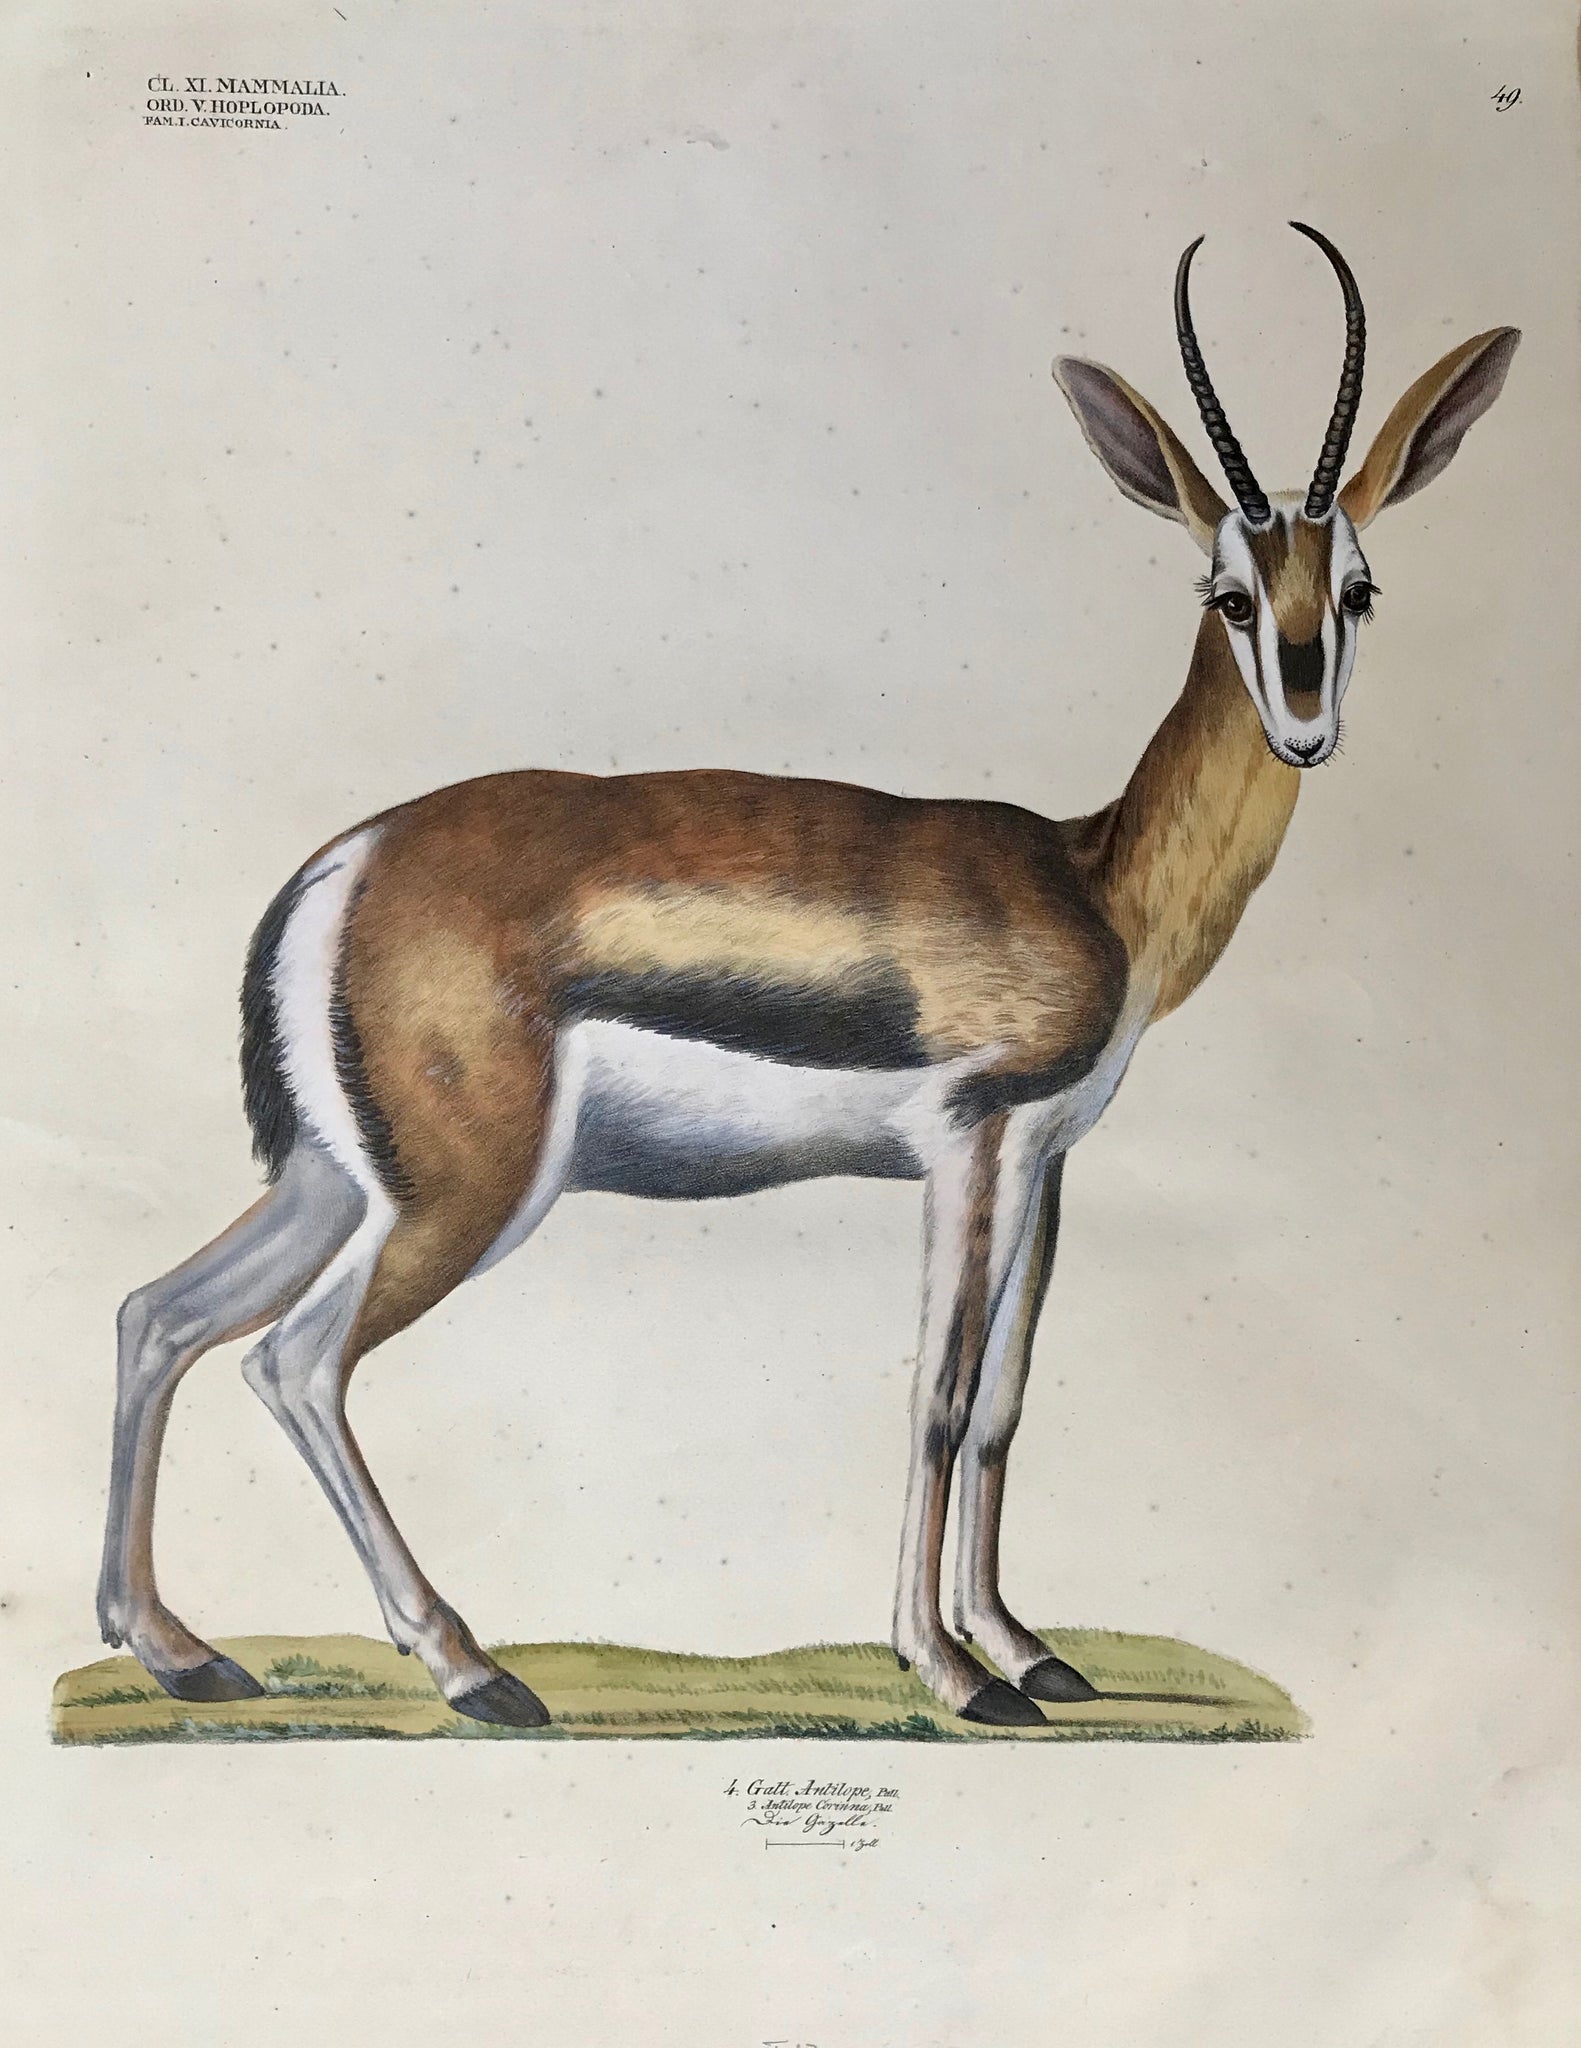 "Antilope - Antilope Corinna - Die Gazelle"Measurement of one INCH below titleLarge Folio. Sheet size: 17.9 x 23"Light scattered spotting.Hand-colored lithograph          Goldfuss Animal and Insect Prints  The "Naturalist Atlas" by Georg August Goldfuss (Bayreuth 1782 - 1848 Bonn). This extra large-size collection of lithographs of spectacular modern coloring depicting animals, birds, reptiles, fish, etc. published in Duesseldorf, at Arnz from 1824 -184